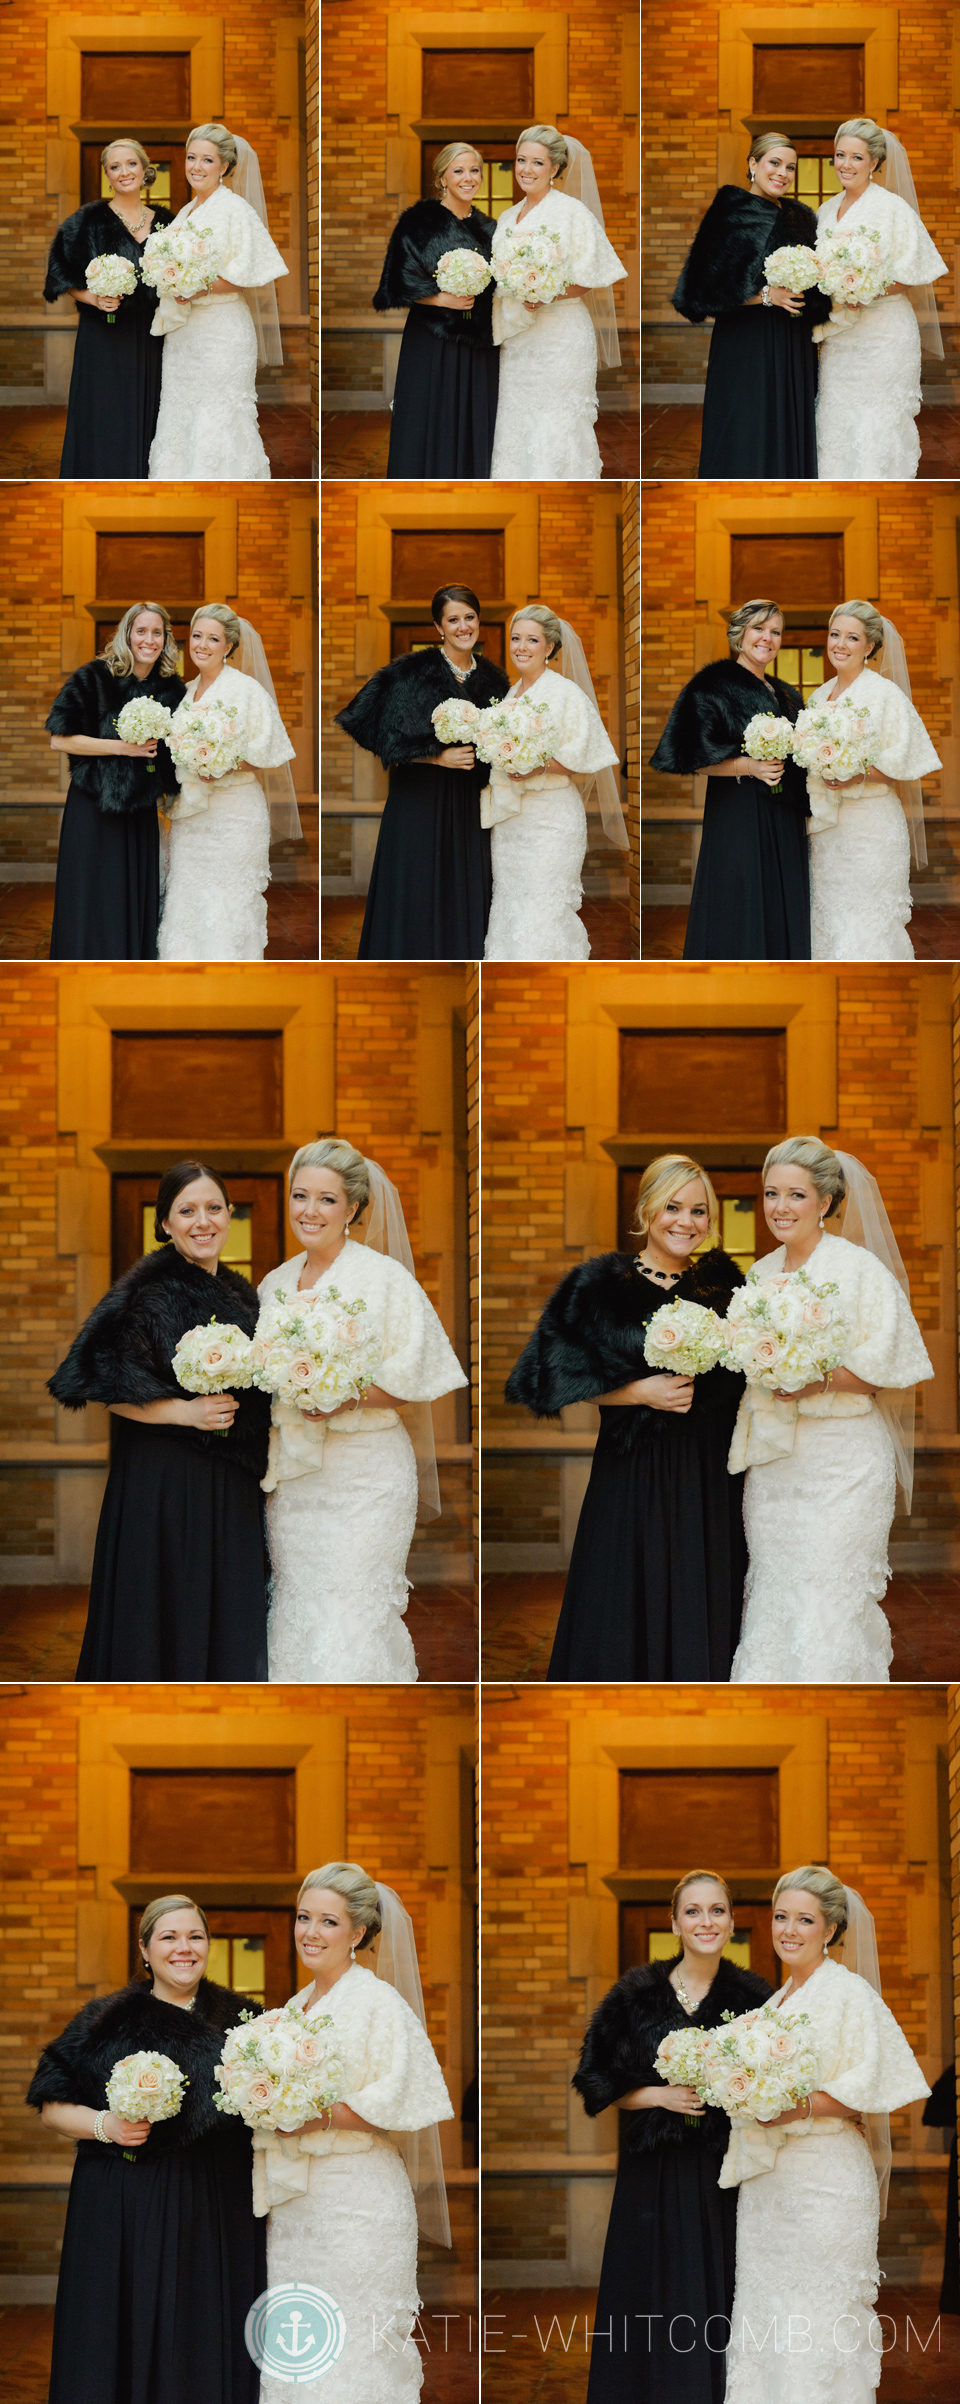 Bridal Party pictures during a winter wedding on St. Mary's Campus in South Bend, IN